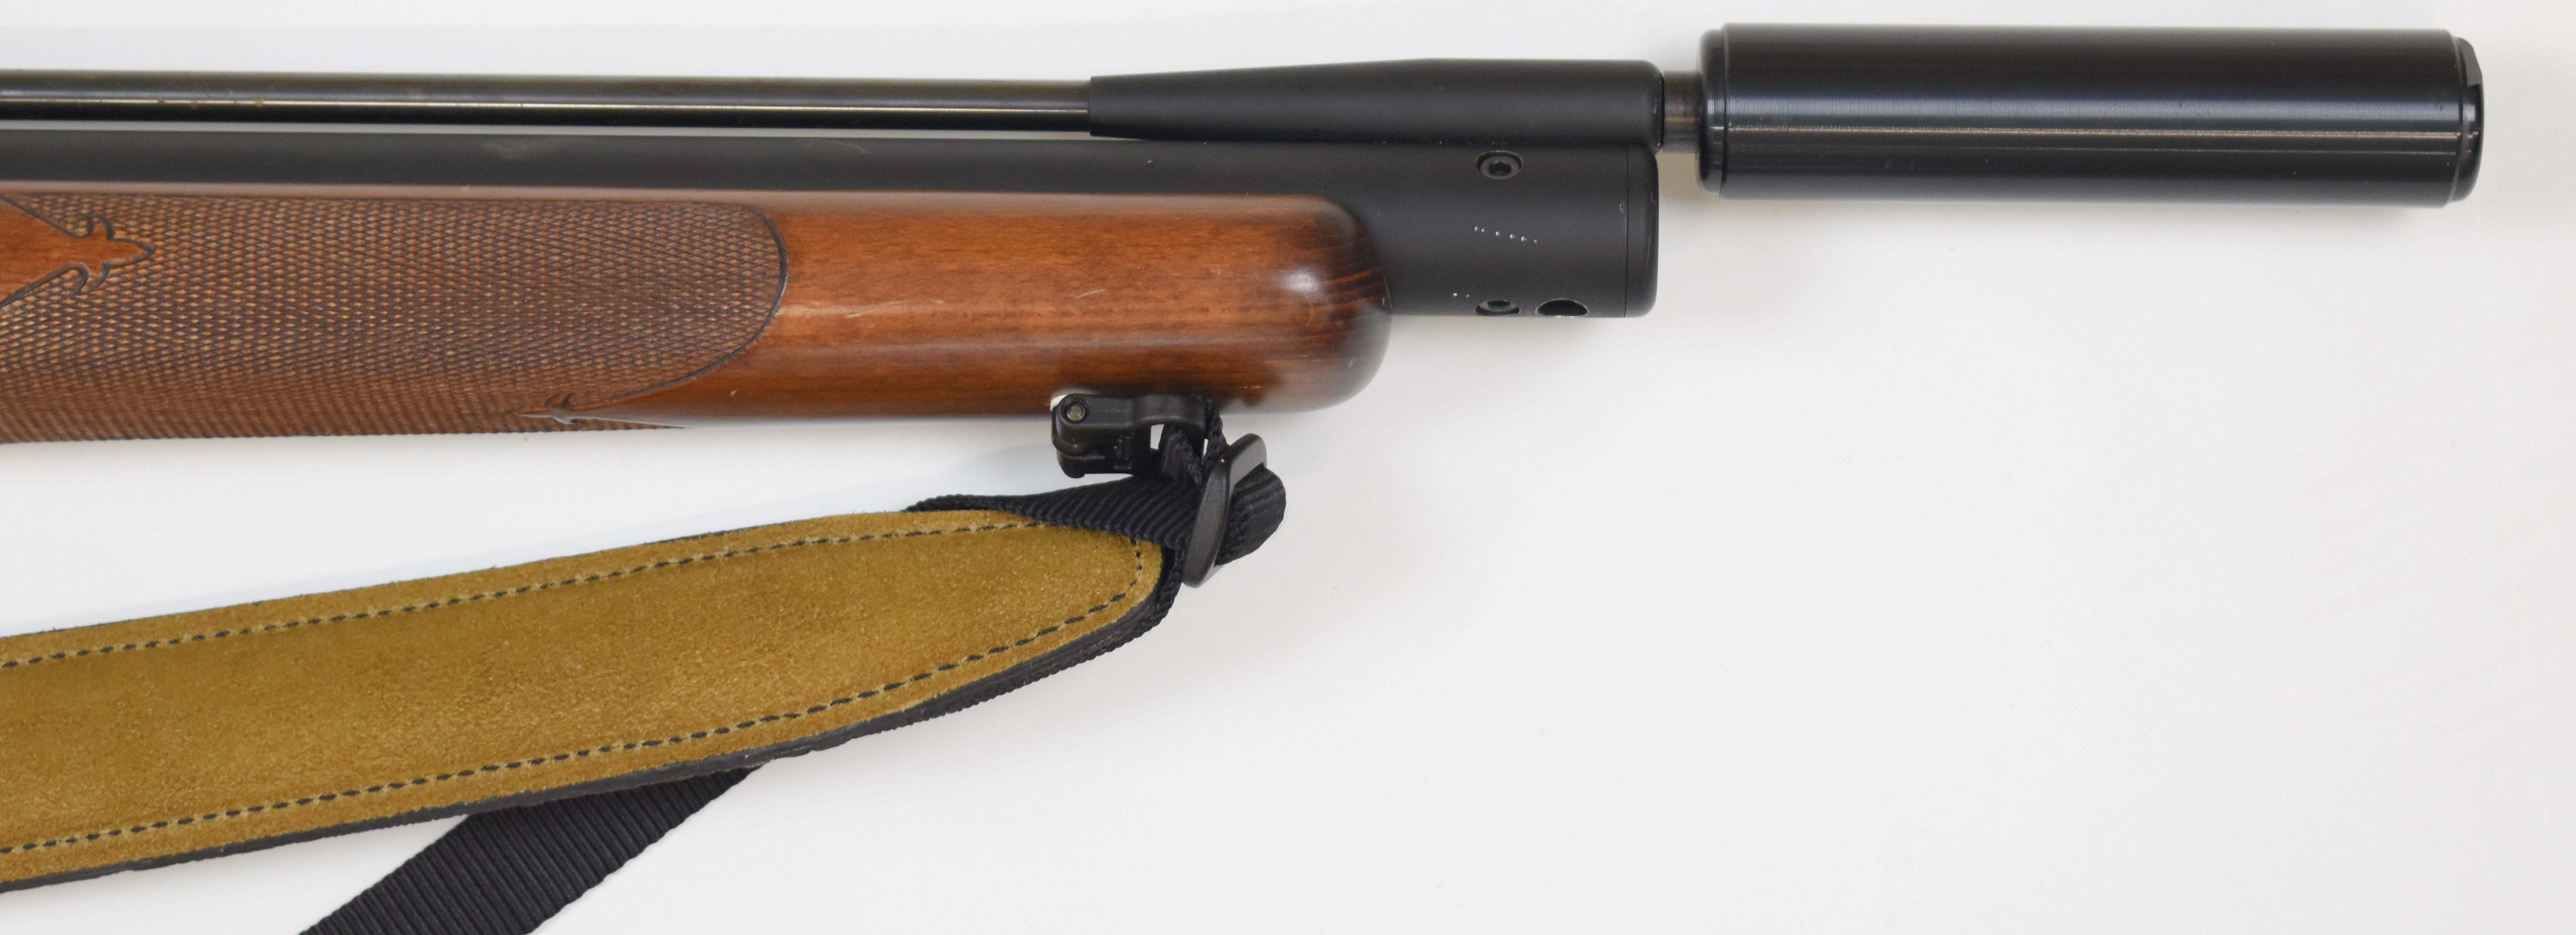 Webley Axsor .22 PCP air rifle with chequered semi-pistol grip and forend, raised cheek piece, - Image 15 of 20